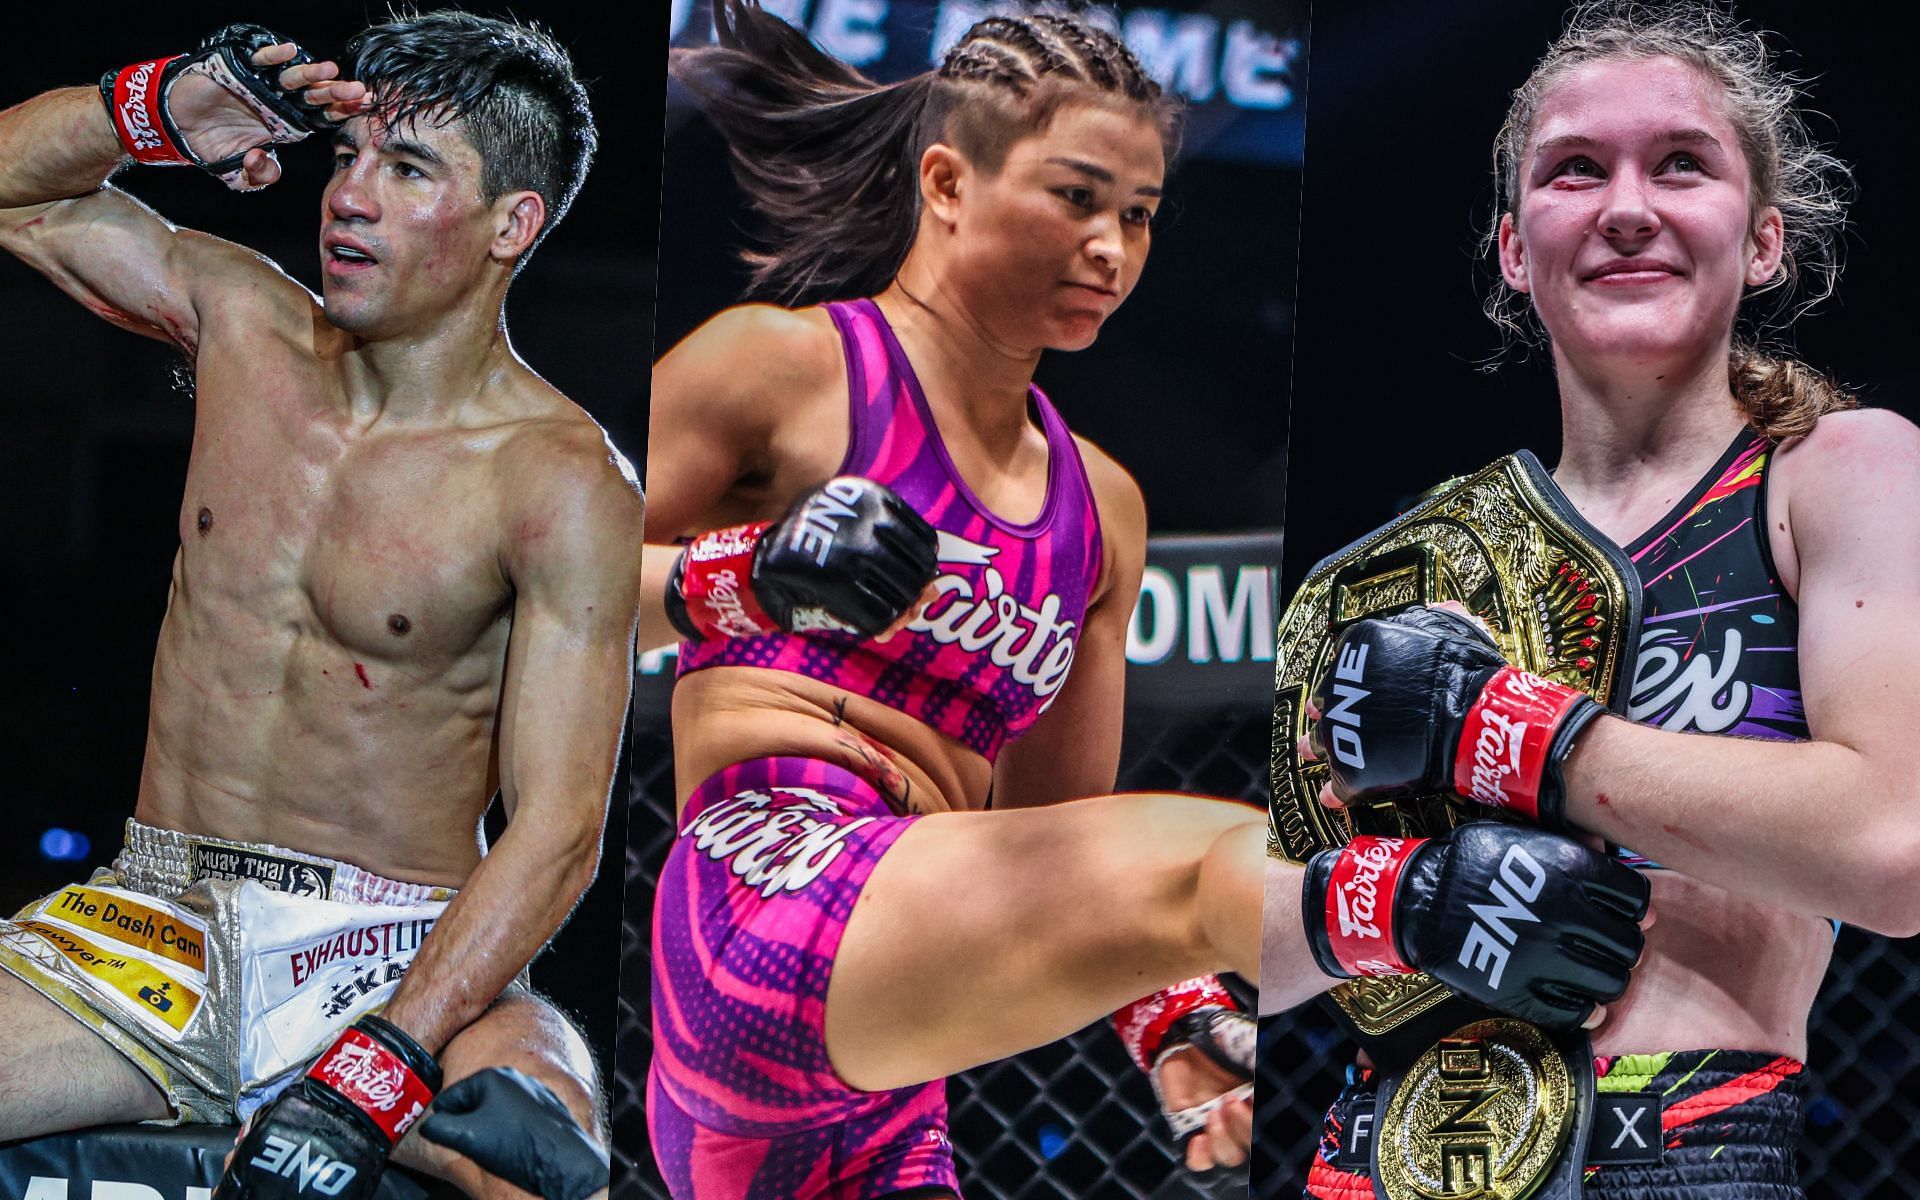 From left to right: Asa Ten Pow, Stamp, Smilla Sundell | Image credit: ONE Championship